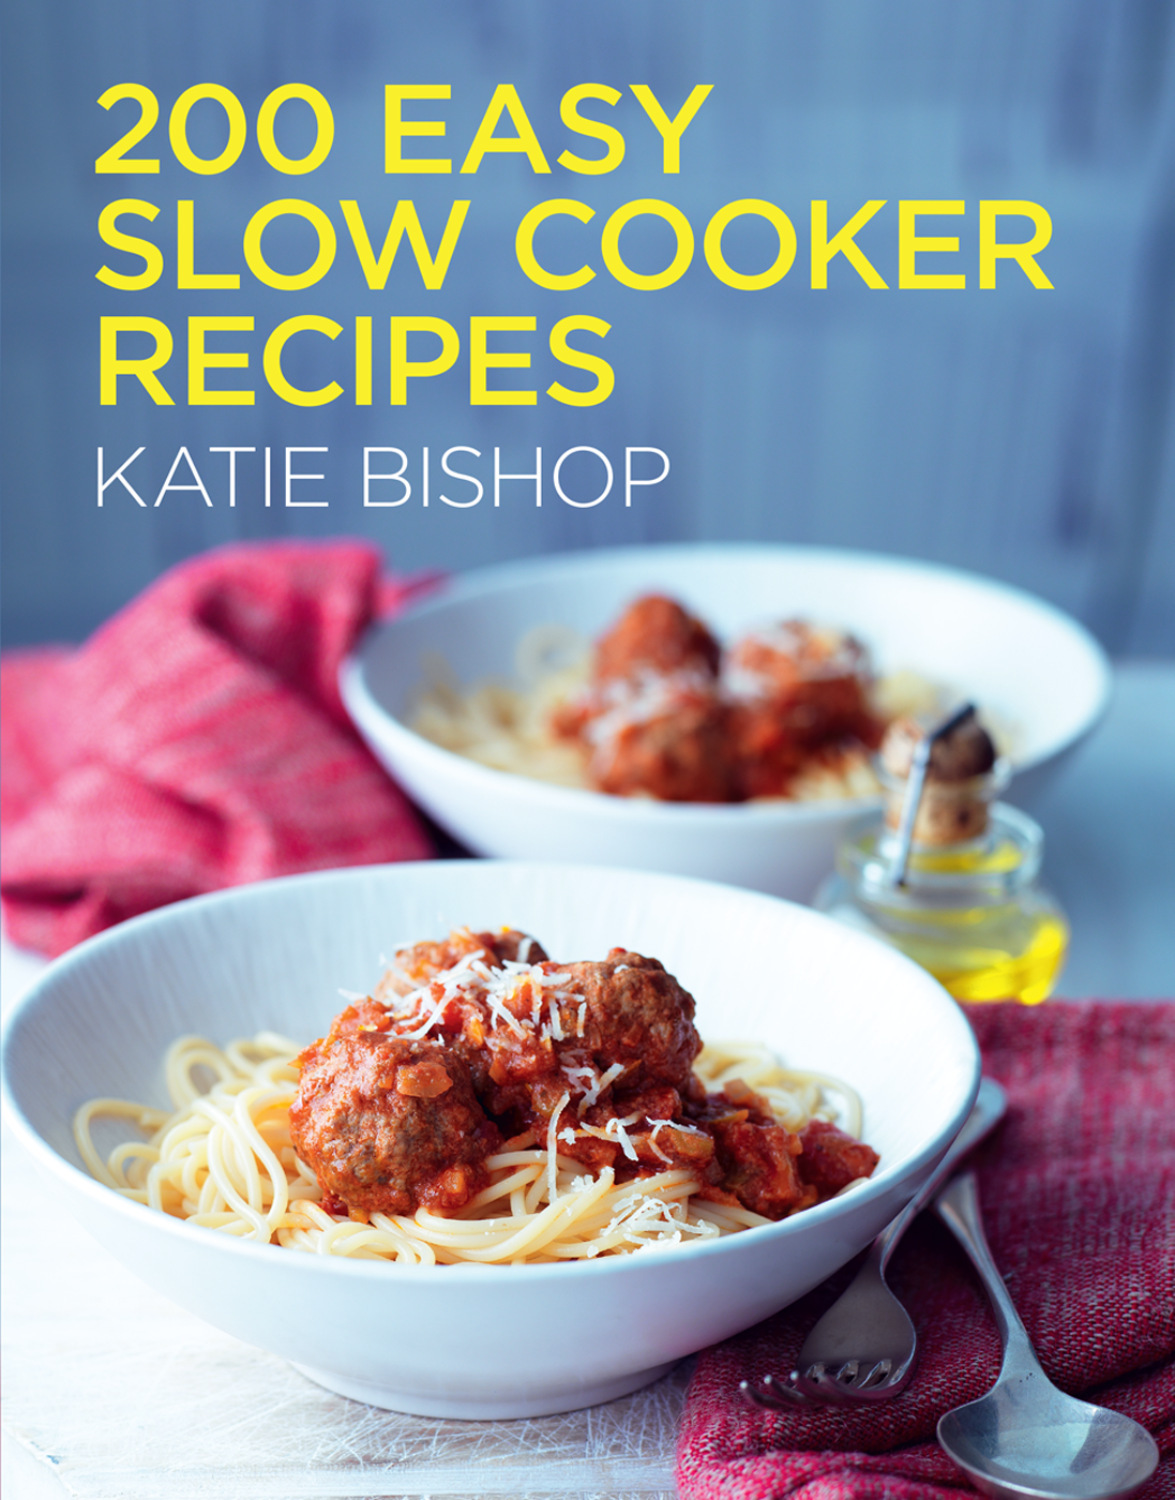 Kate to cook. 200 Light Slow Cooker Recipes. Кэти Бишоп. 200 Easy Cakes & Bakes.